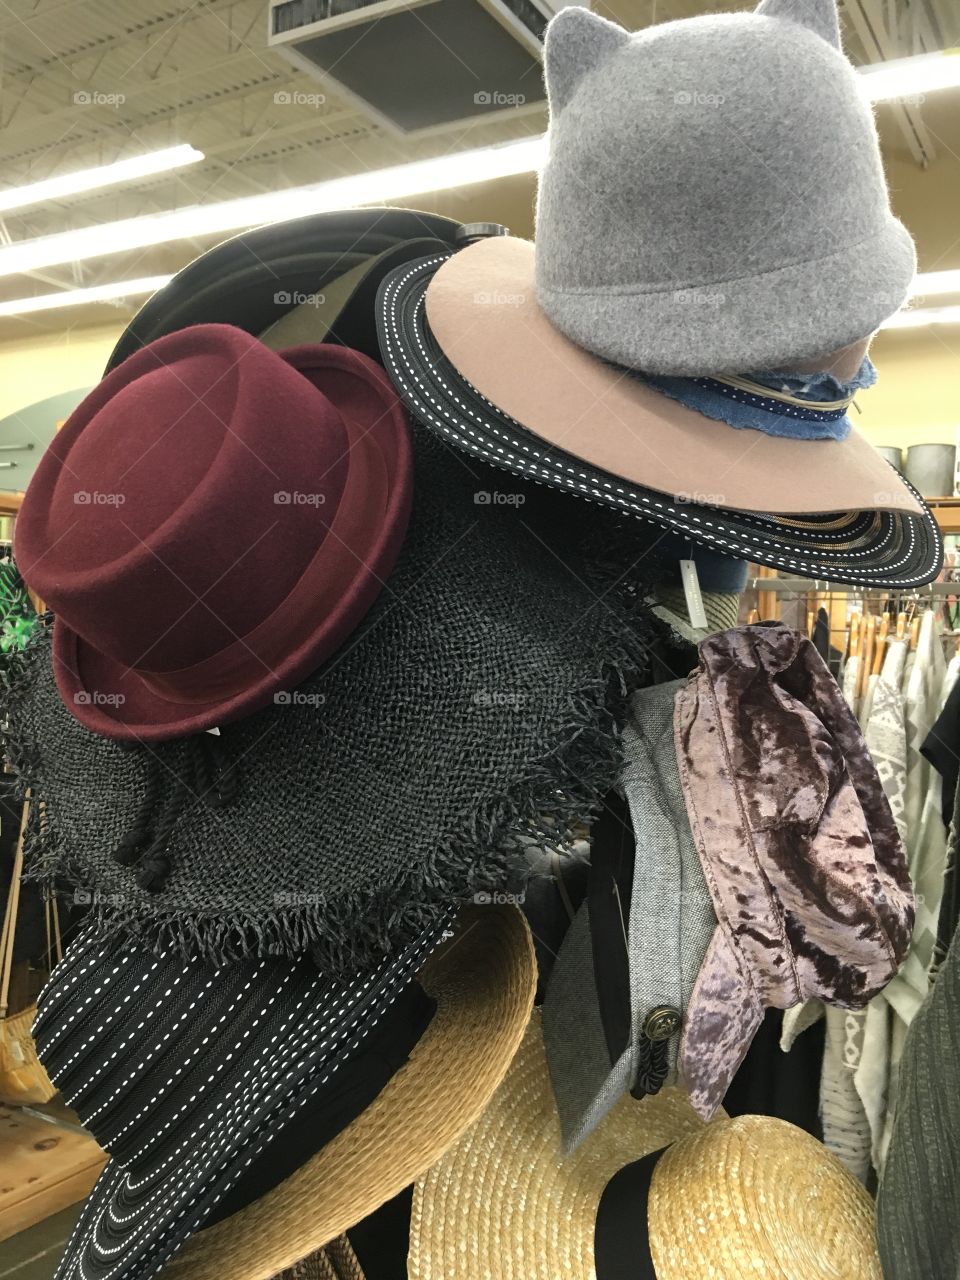 Hats of all kinds at World Market 